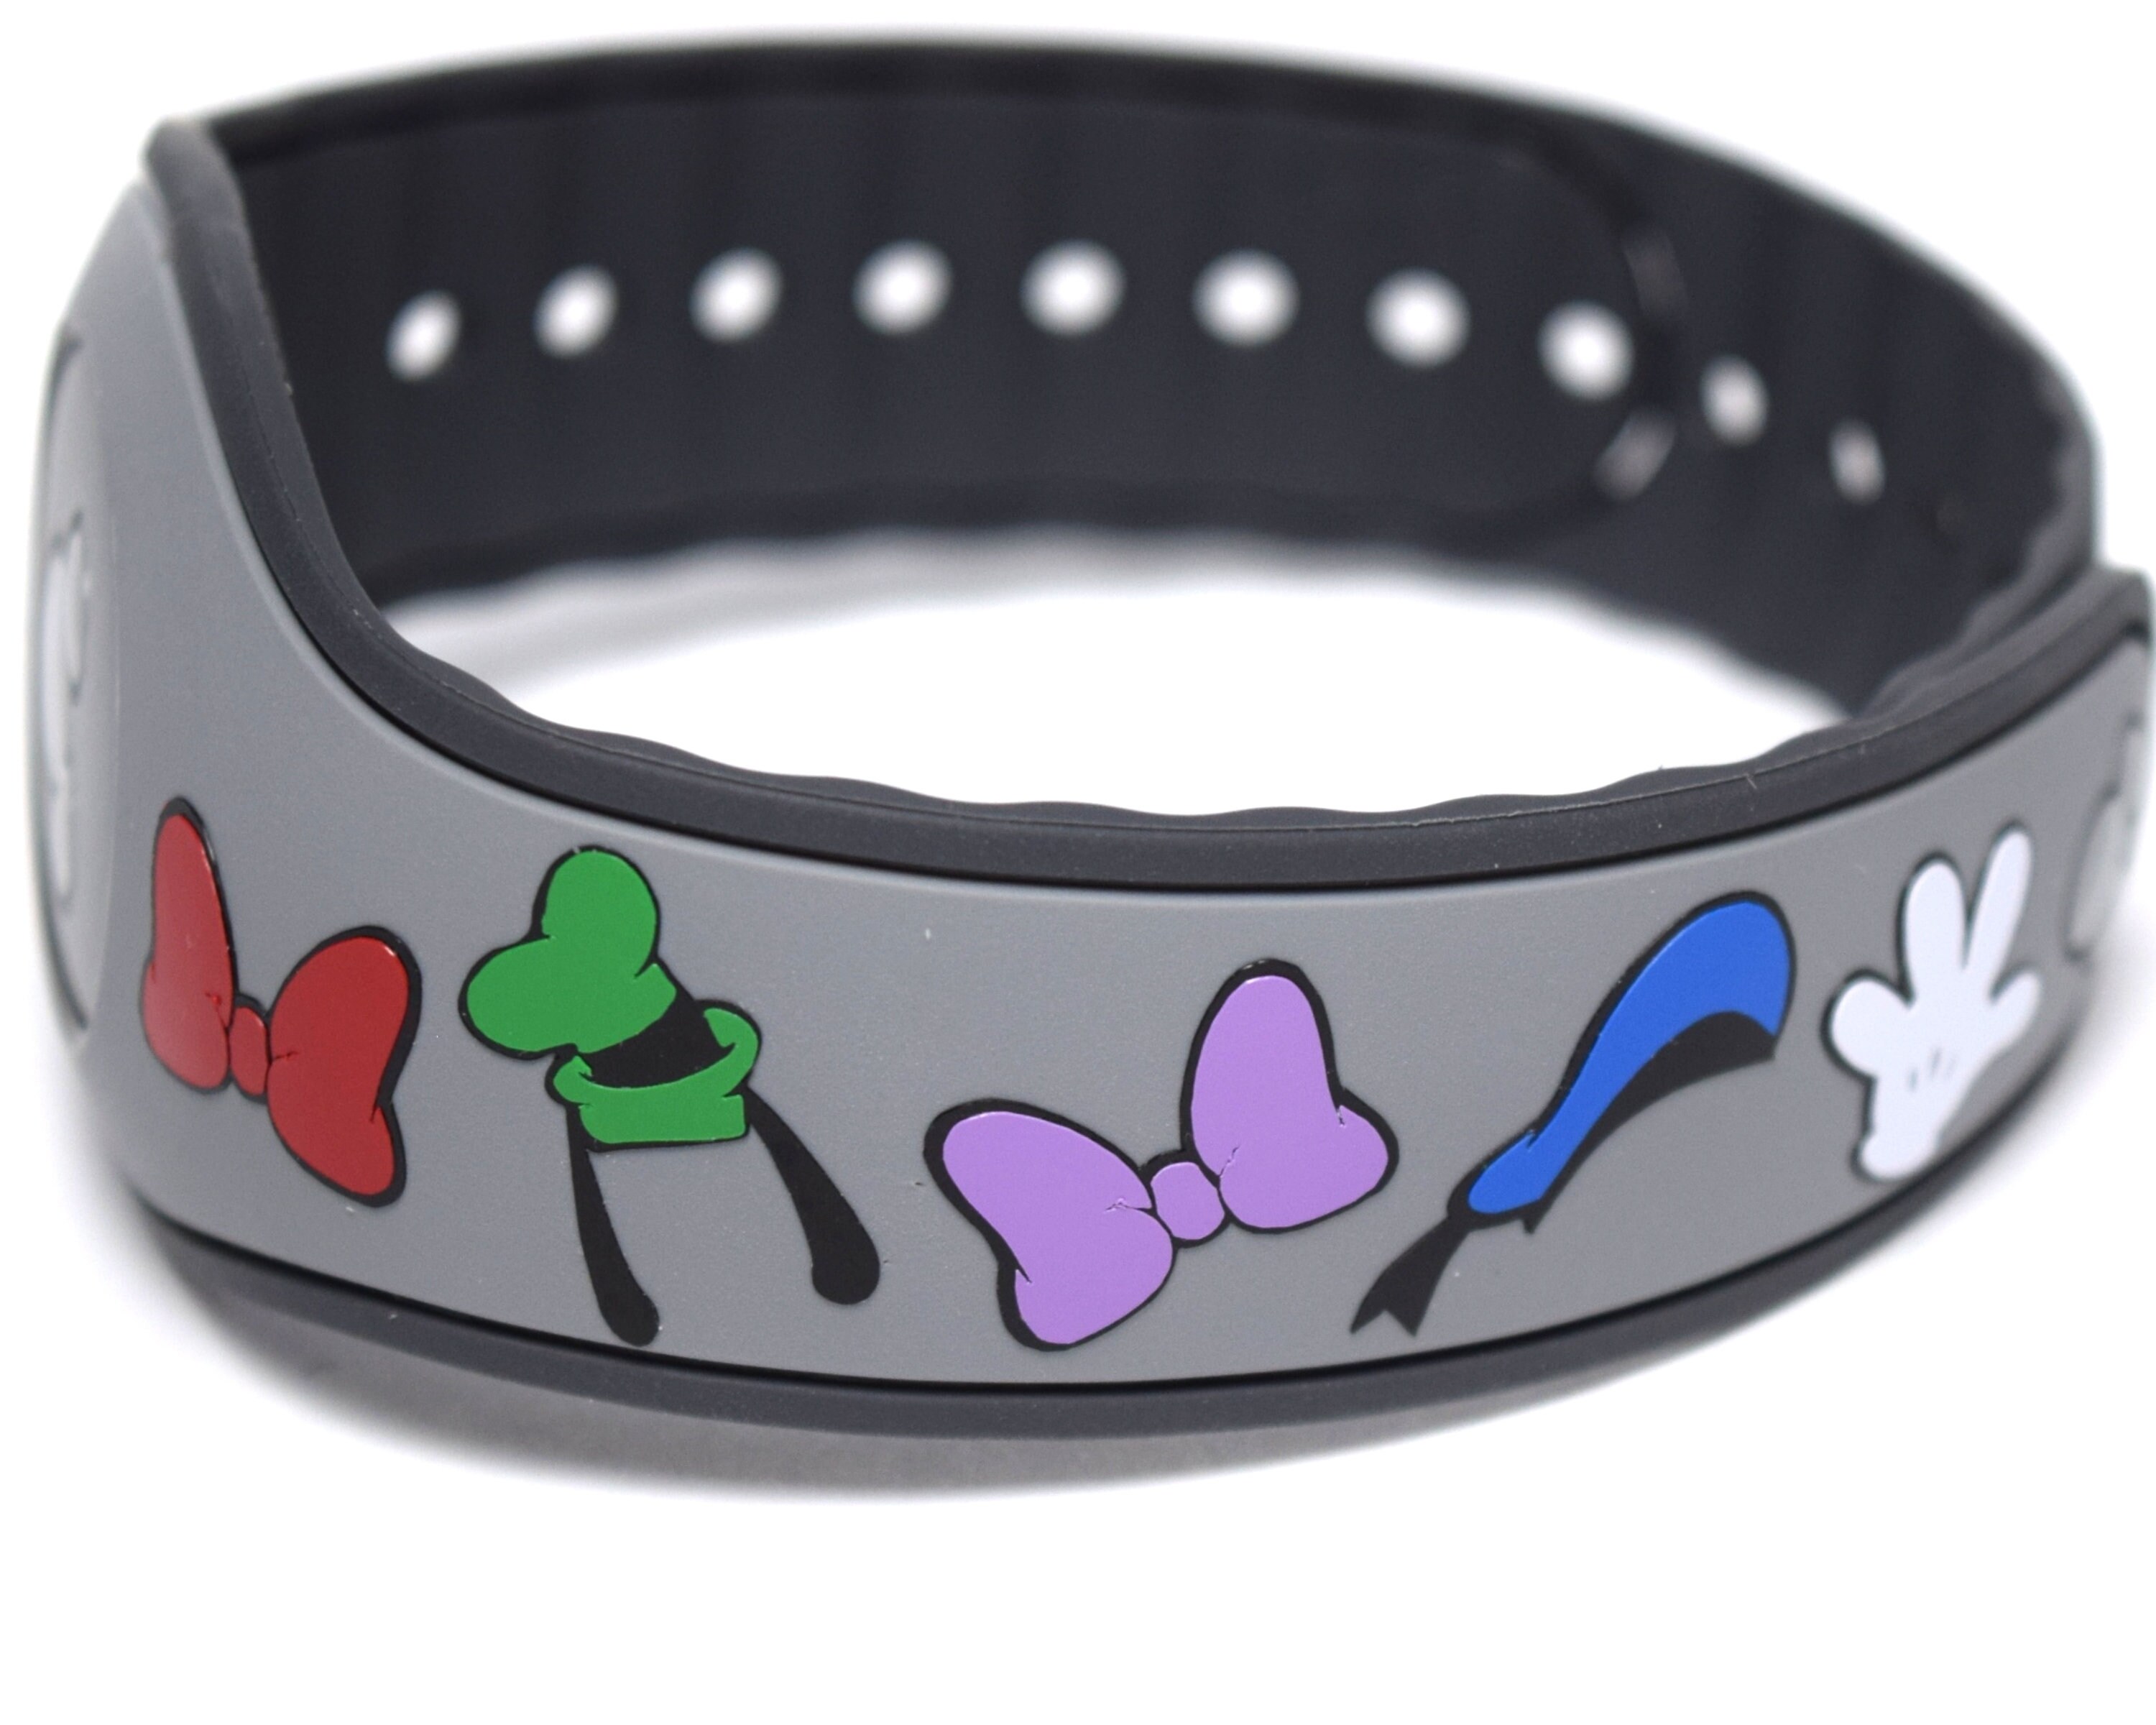 Beauty & the Beast Vinyl Sticker for Magic Band Puck Mickey Custom Decoration for Disney World Trip Beast Decal for MagicBand 2